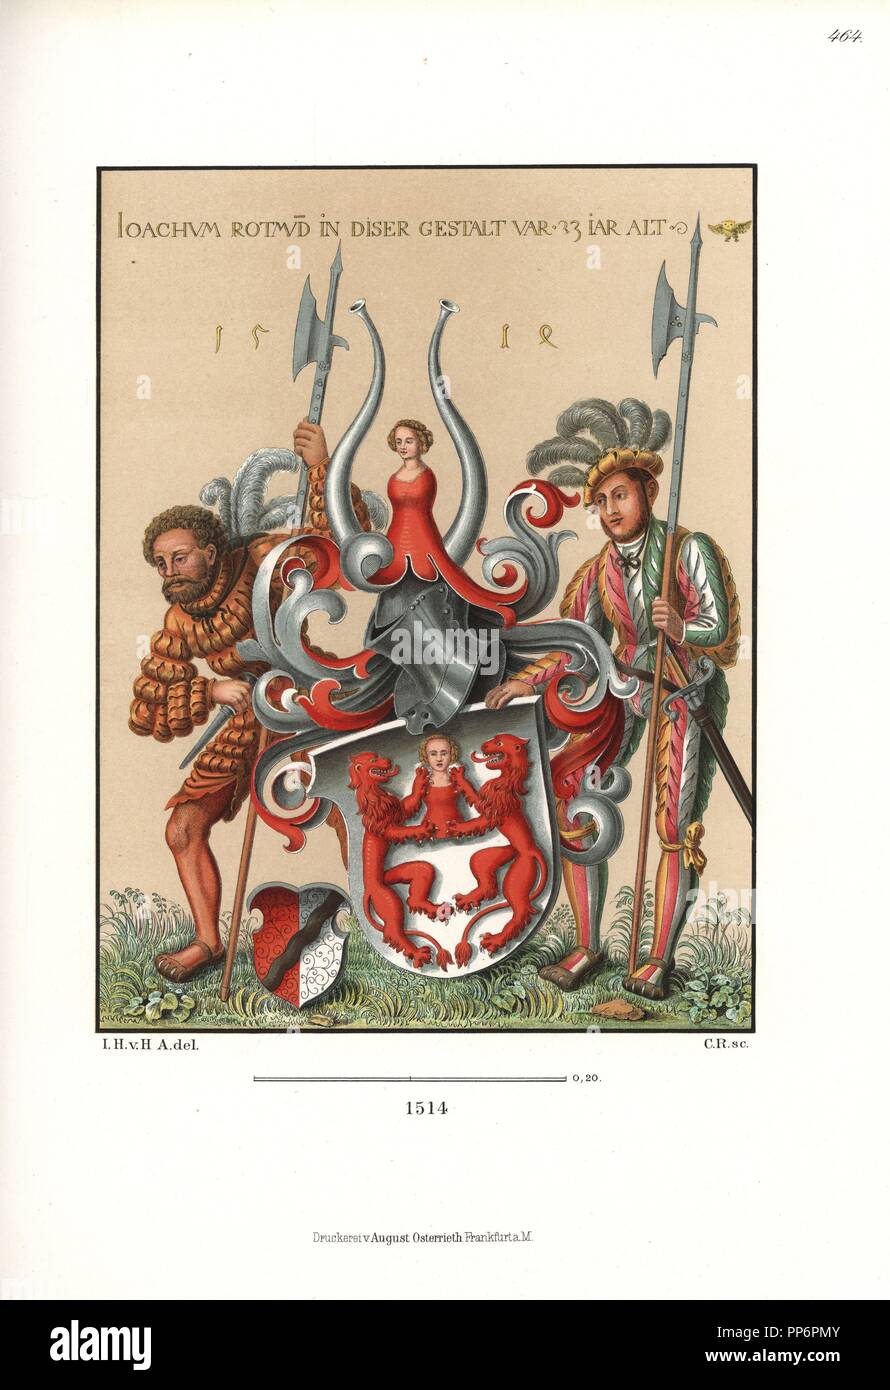 Two German mercenaries with halberds holding a coat of arms, early 16th century. The shield depicts two red lions rampant holding a bust of a woman, with helmet, horns and woman's bust above. Inscribed with 'Joachum Rotmund in dieser Gestalt war 23 Jahr alt,' monogram of the painter, an owl, and the year 1514. Chromolithograph from Hefner-Alteneck's 'Costumes, Artworks and Appliances from the Middle Ages to the 17th Century,' Frankfurt, 1889. Illustration by Dr. Jakob Heinrich von Hefner-Alteneck, lithographed by C. Regnier. Dr. Hefner-Alteneck (1811 - 1903) was a German museum curator, archae Stock Photo